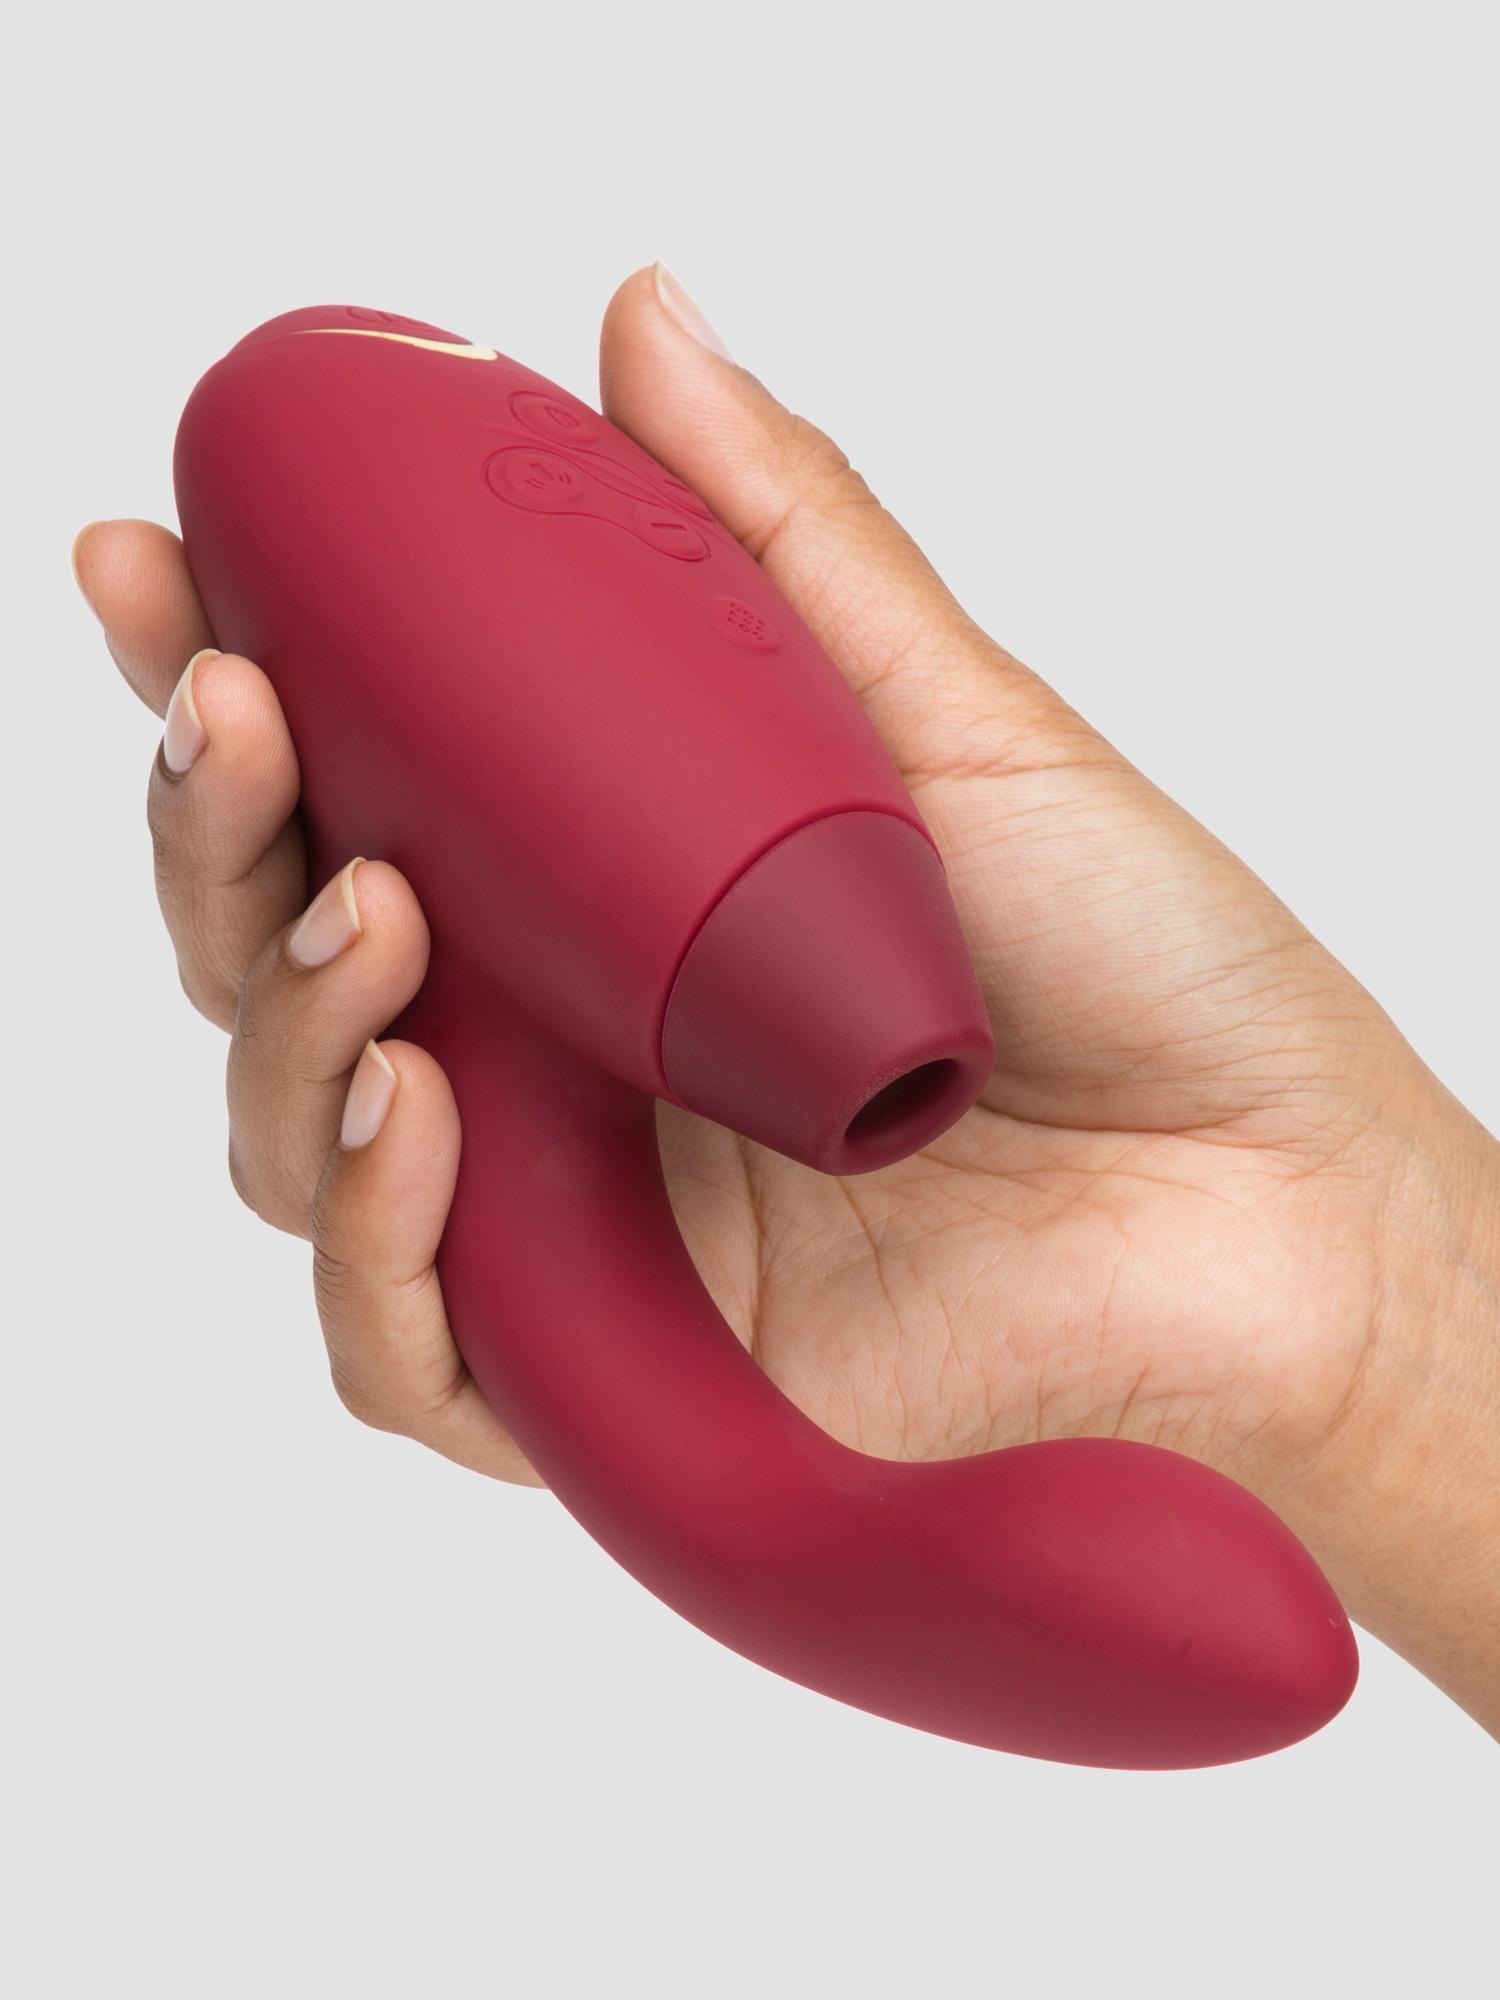 14 Sex Toys Designed For Some Intense Clitoral Stimulation HuffPost Life photo